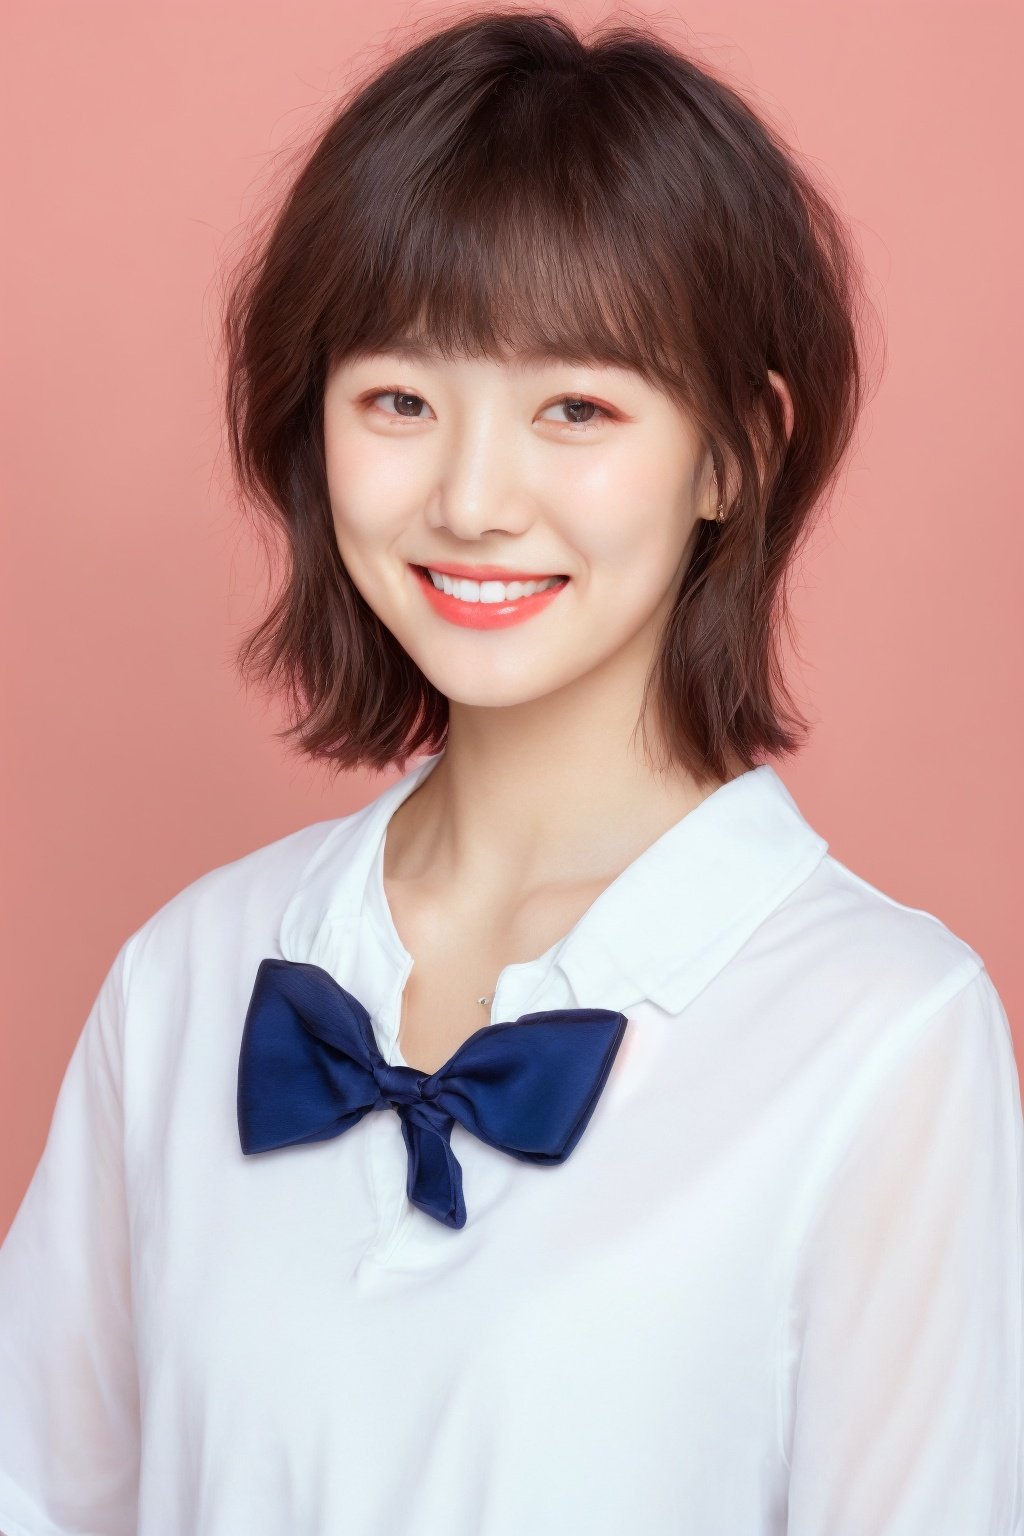 ID photo, a boy,solo,upper body,a short-haired woman wearing a white shirt and red tie. She smiles at the camera, light green solid background,blue_IDphoto